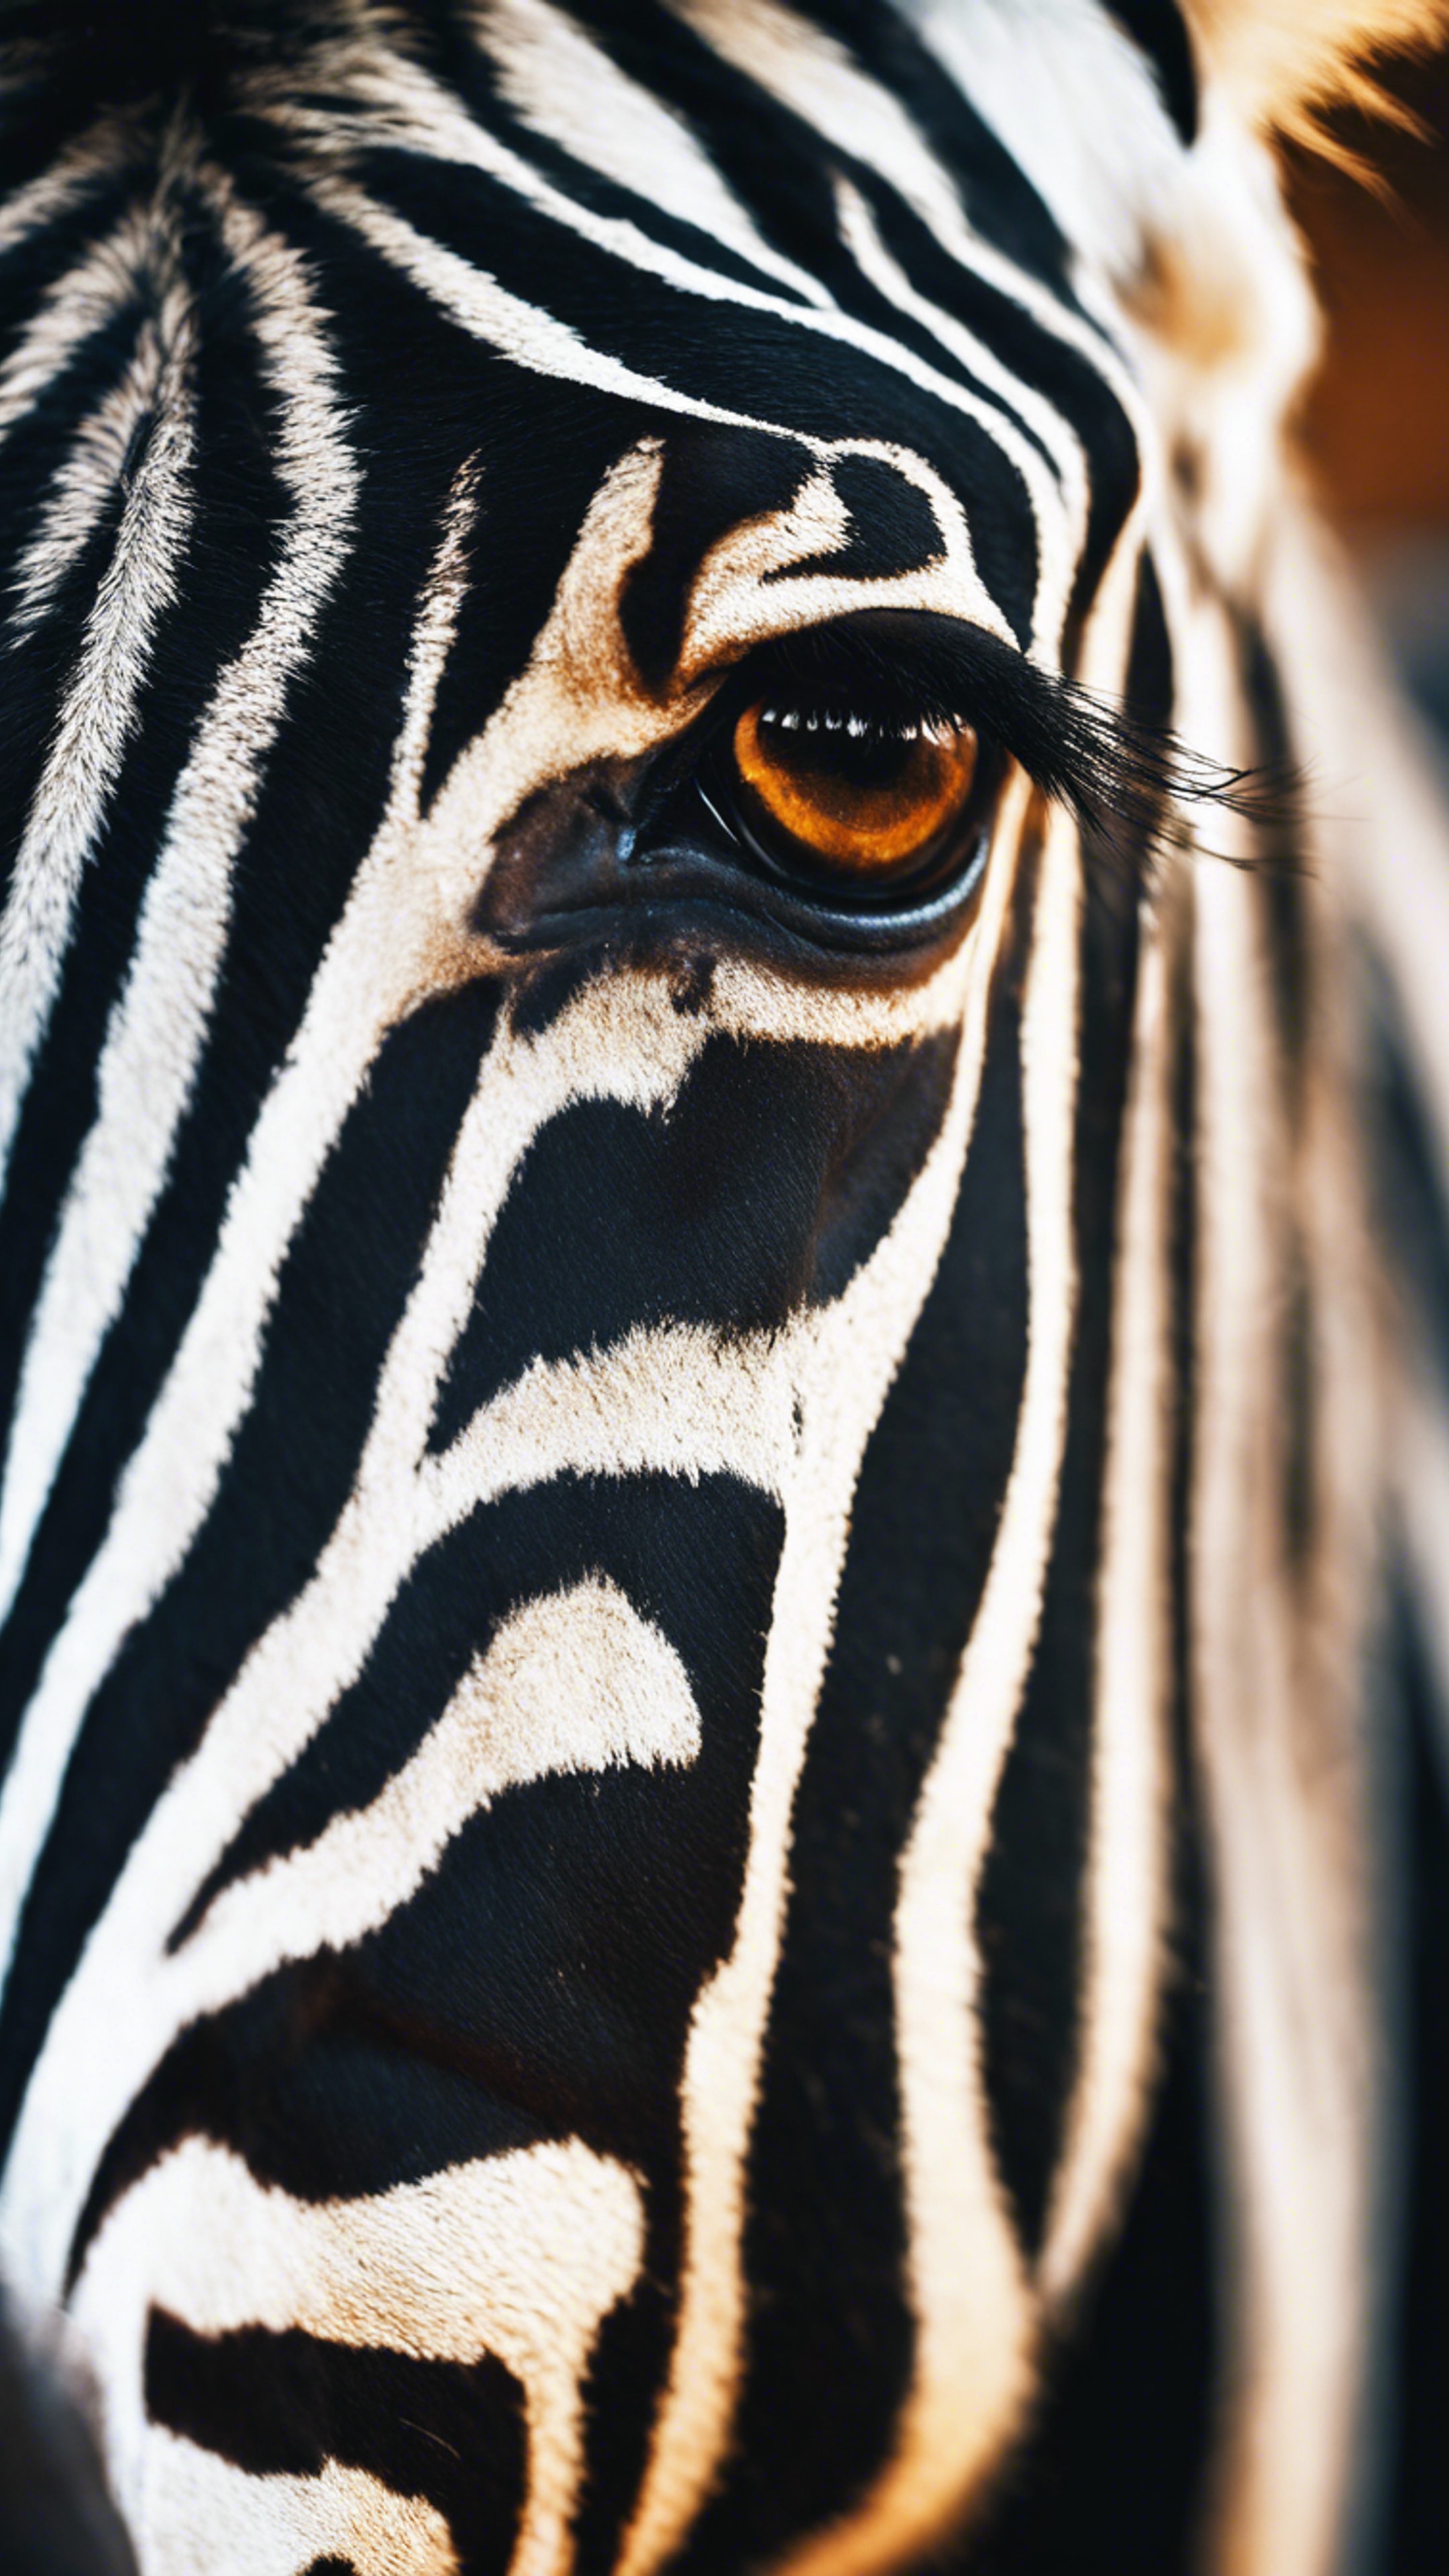 A close-up shot of a zebra's eye expressing strong emotions. Валлпапер[ea30c6a0b471421fa723]